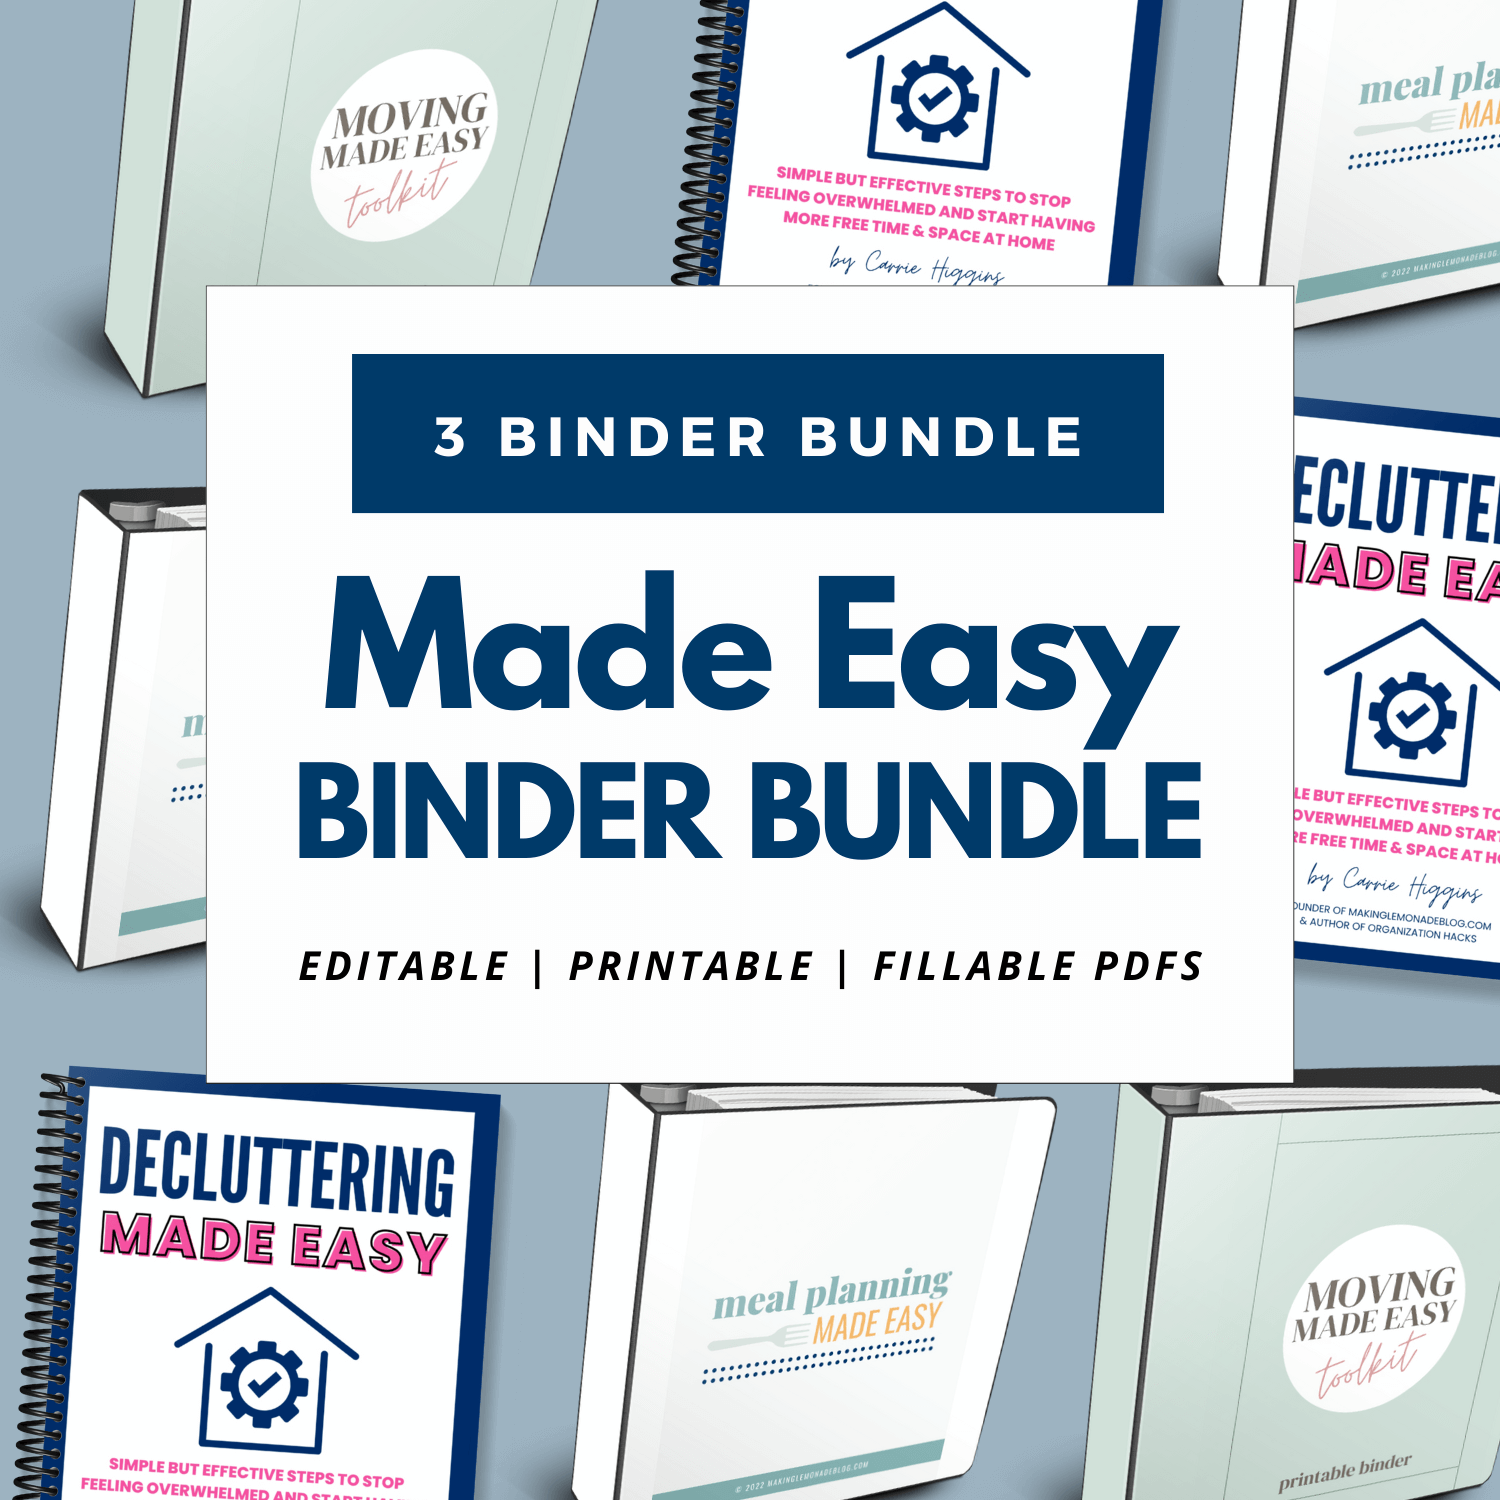 Home systems made easy binders